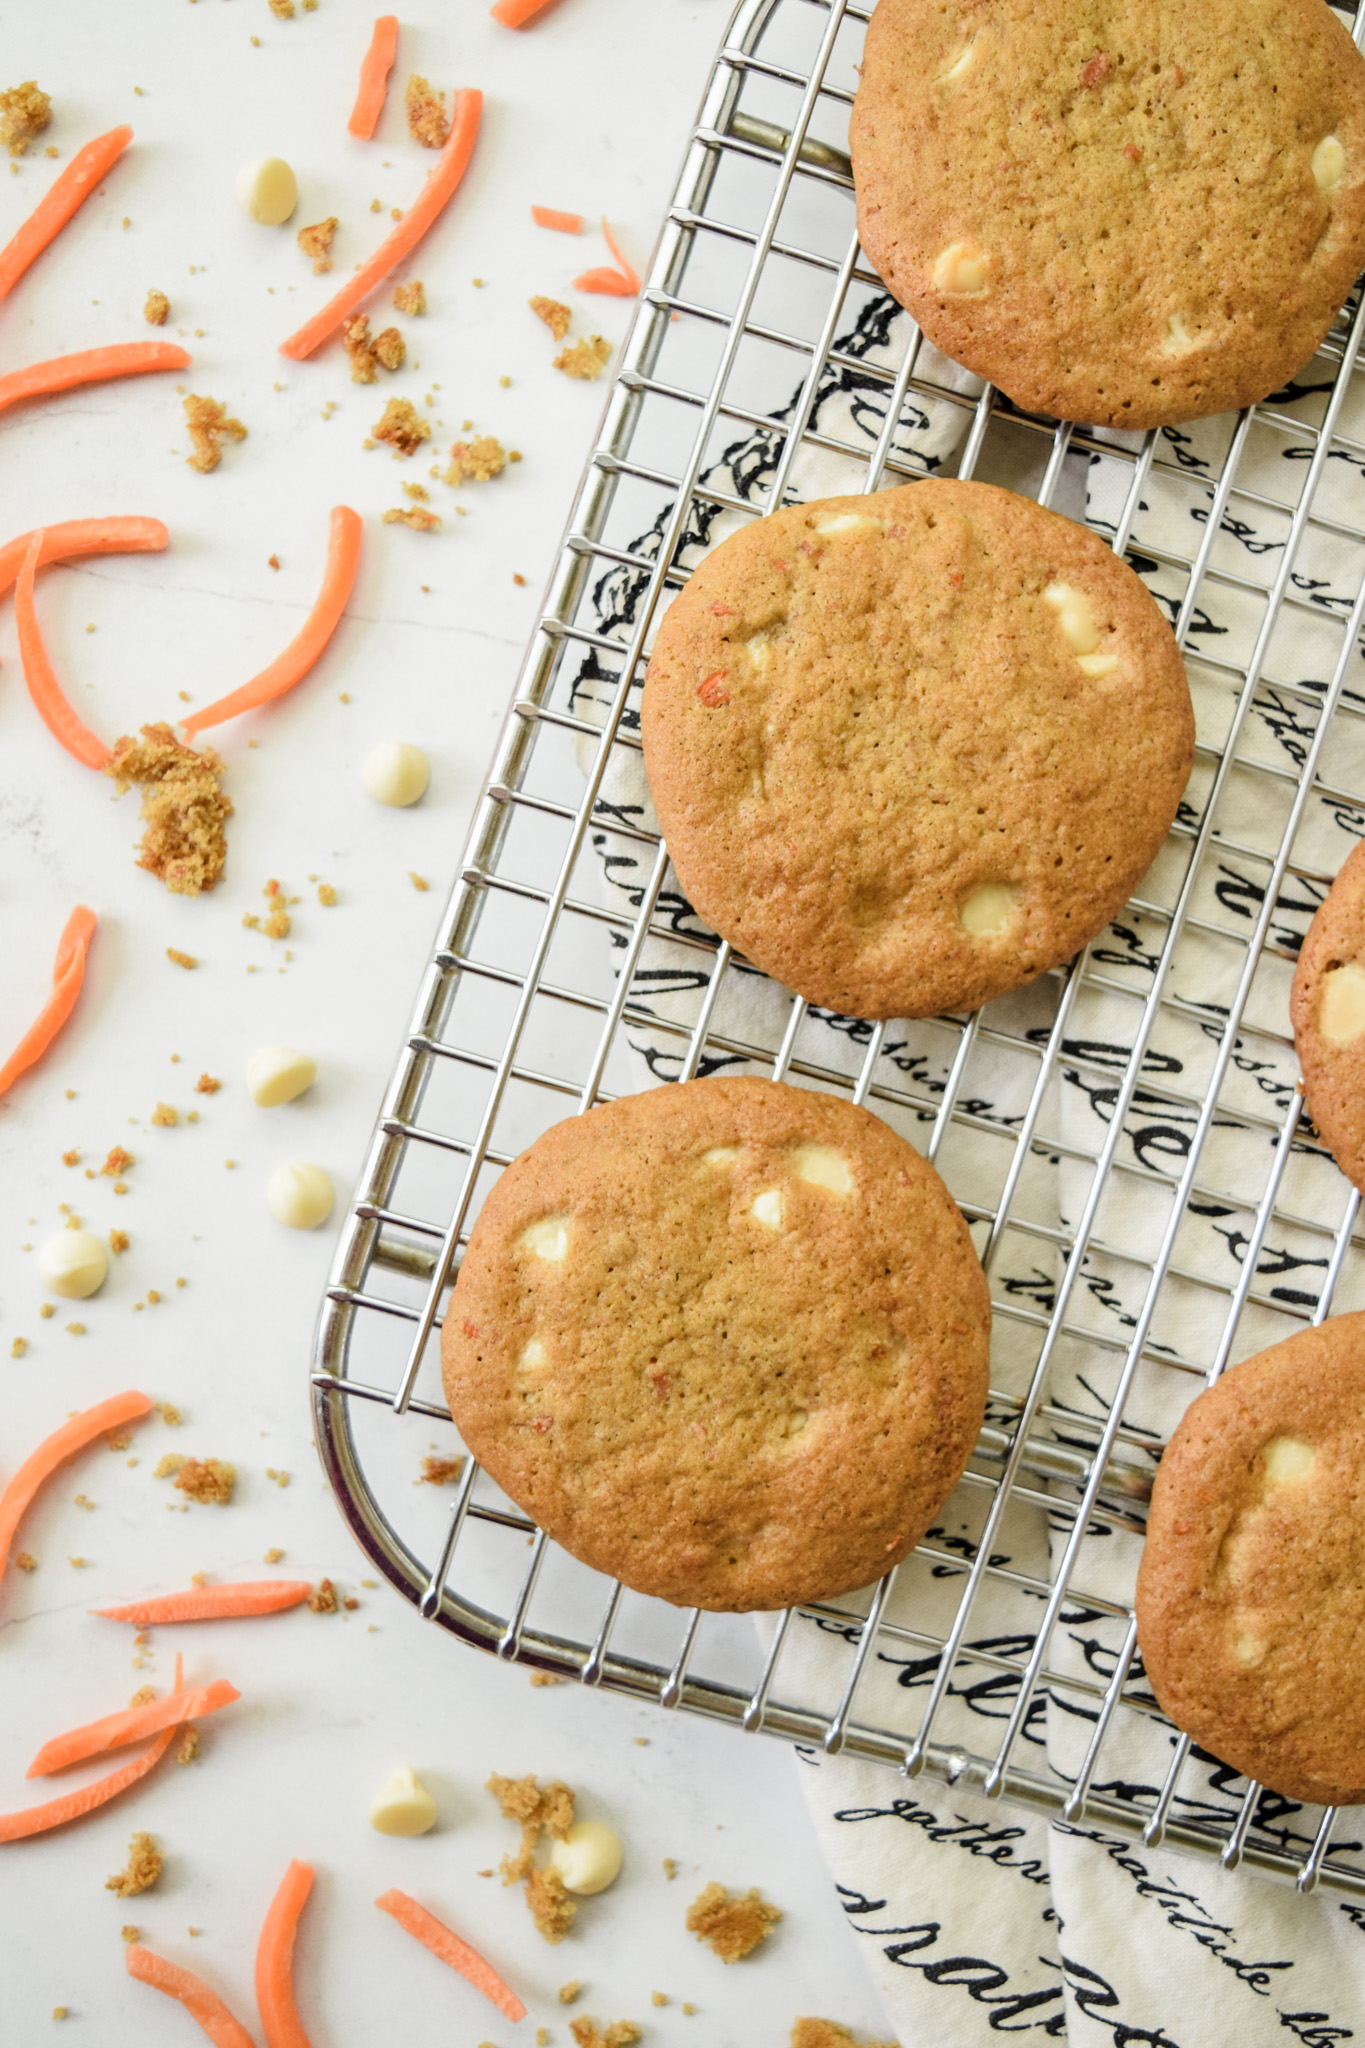 Gluten Free Carrot Cake Cookies with White Chocolate Chips on a Cooling Rack